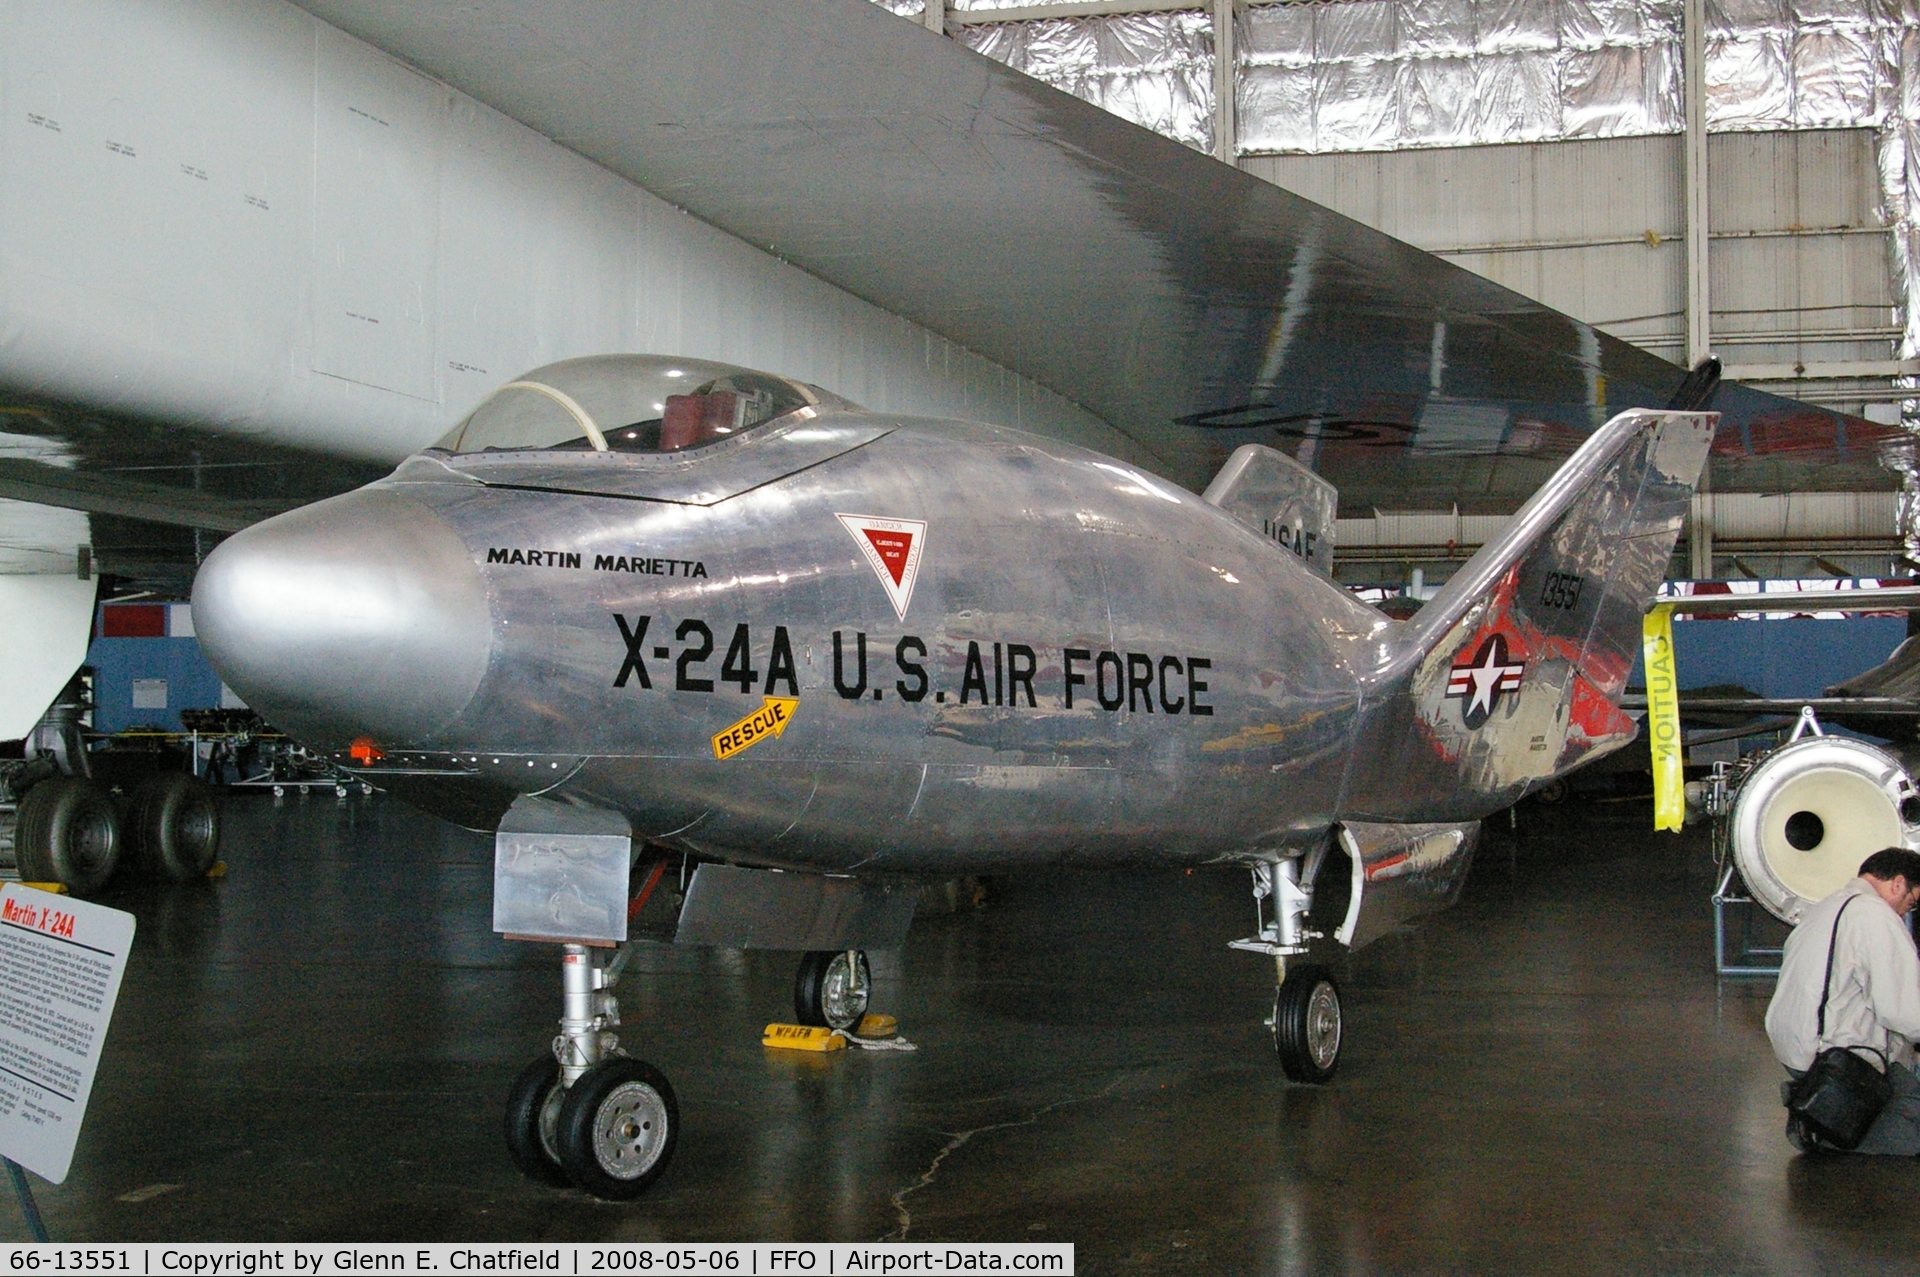 66-13551, Martin Marietta X-24A (SV-5J) C/N 2, SV-5J modified to look like an X-24A. Development aircraft for the X-24 program. Located now at the National Museum of the U.S. Air Force.  S/N is bogus